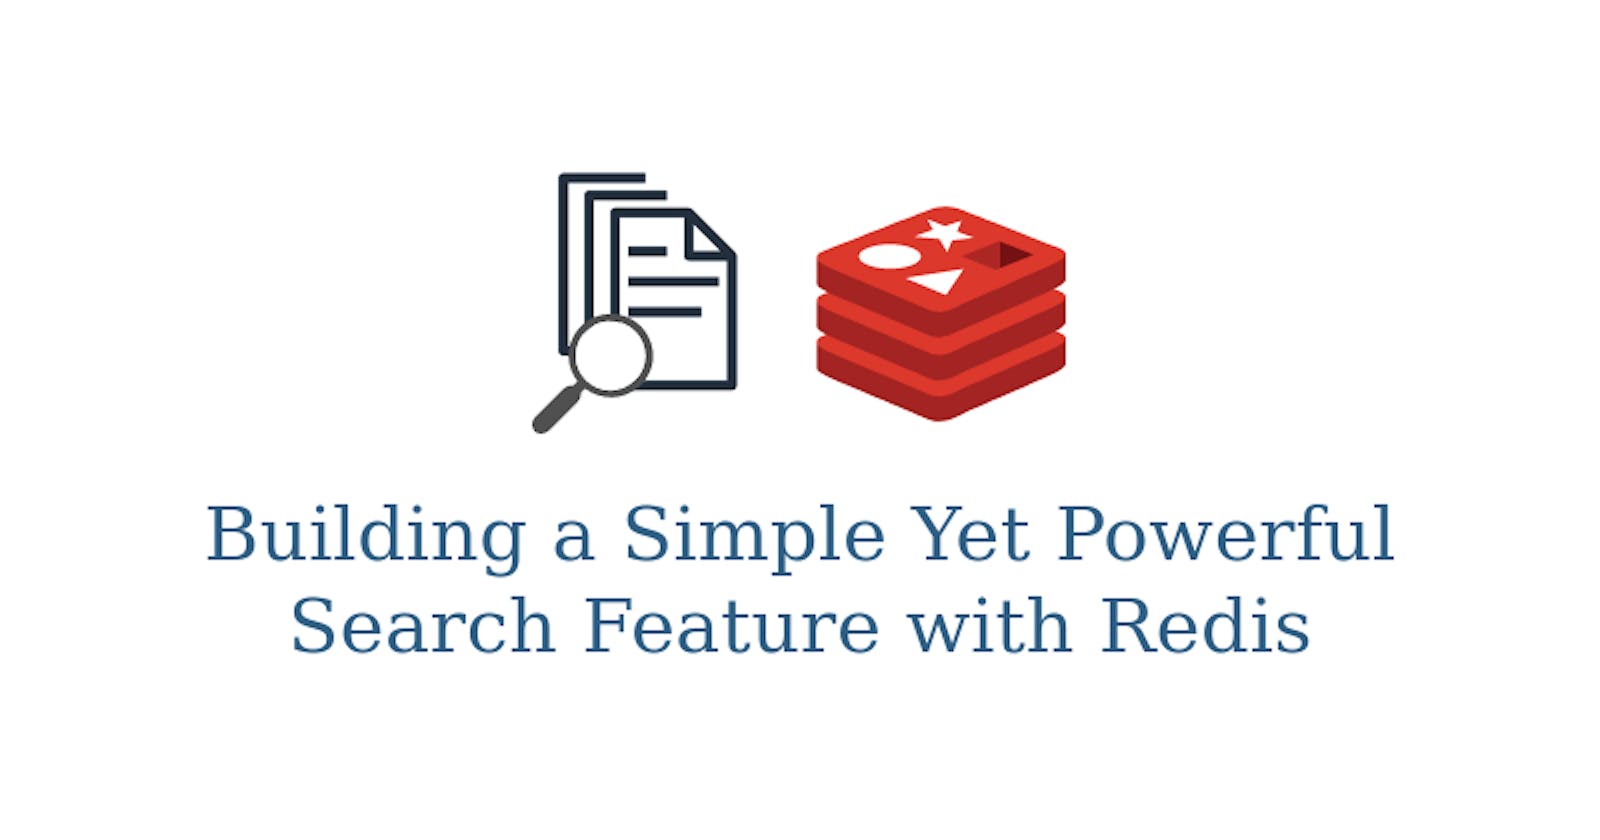 Building a Simple Yet Powerful Search Feature with Redis